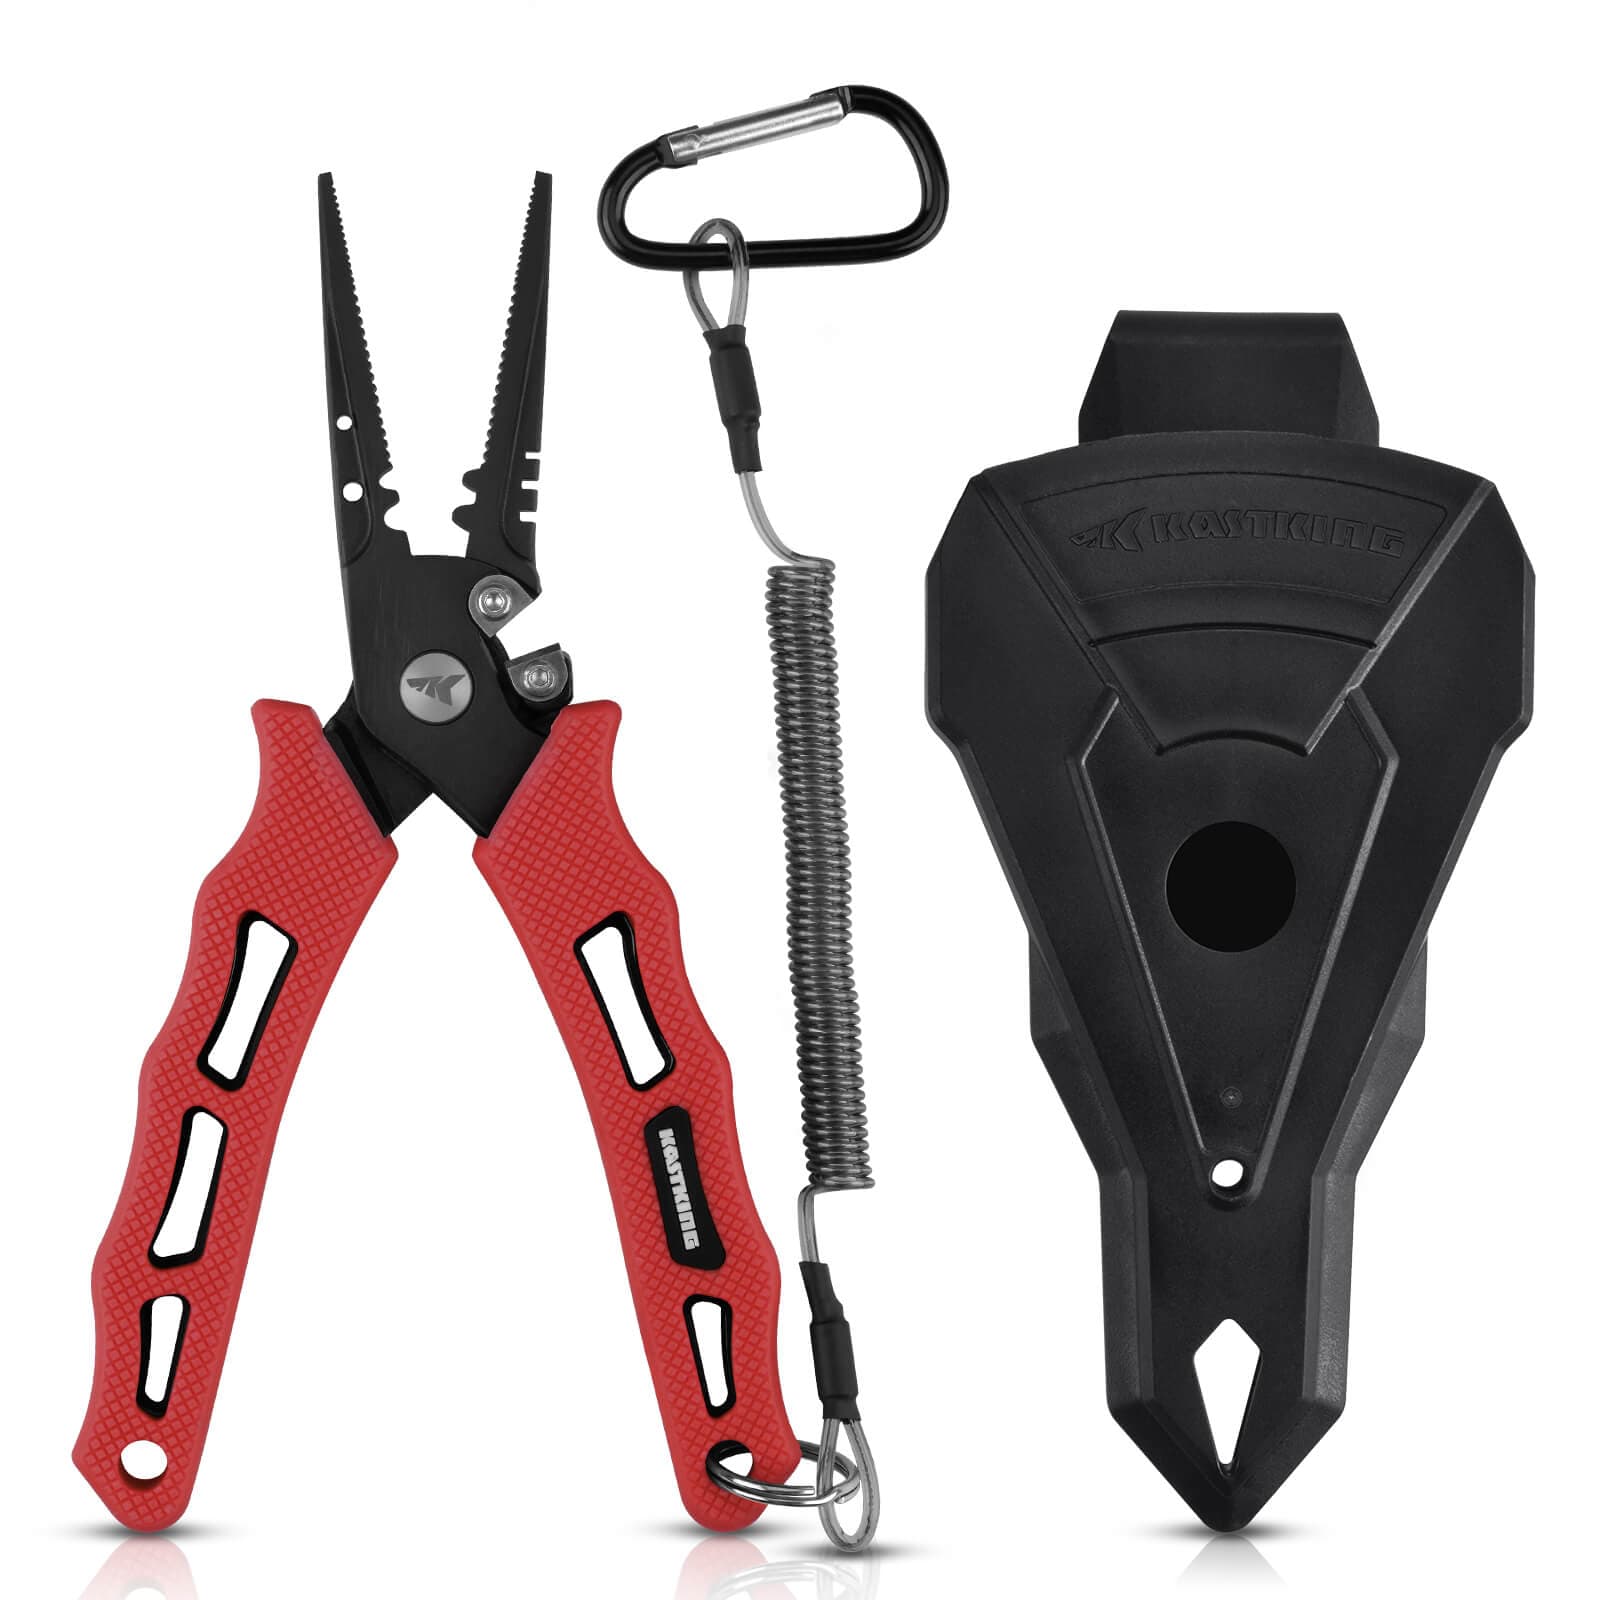 KastKing Cutthroat 7-inch Fishing Pliers - Red / Straight Nose